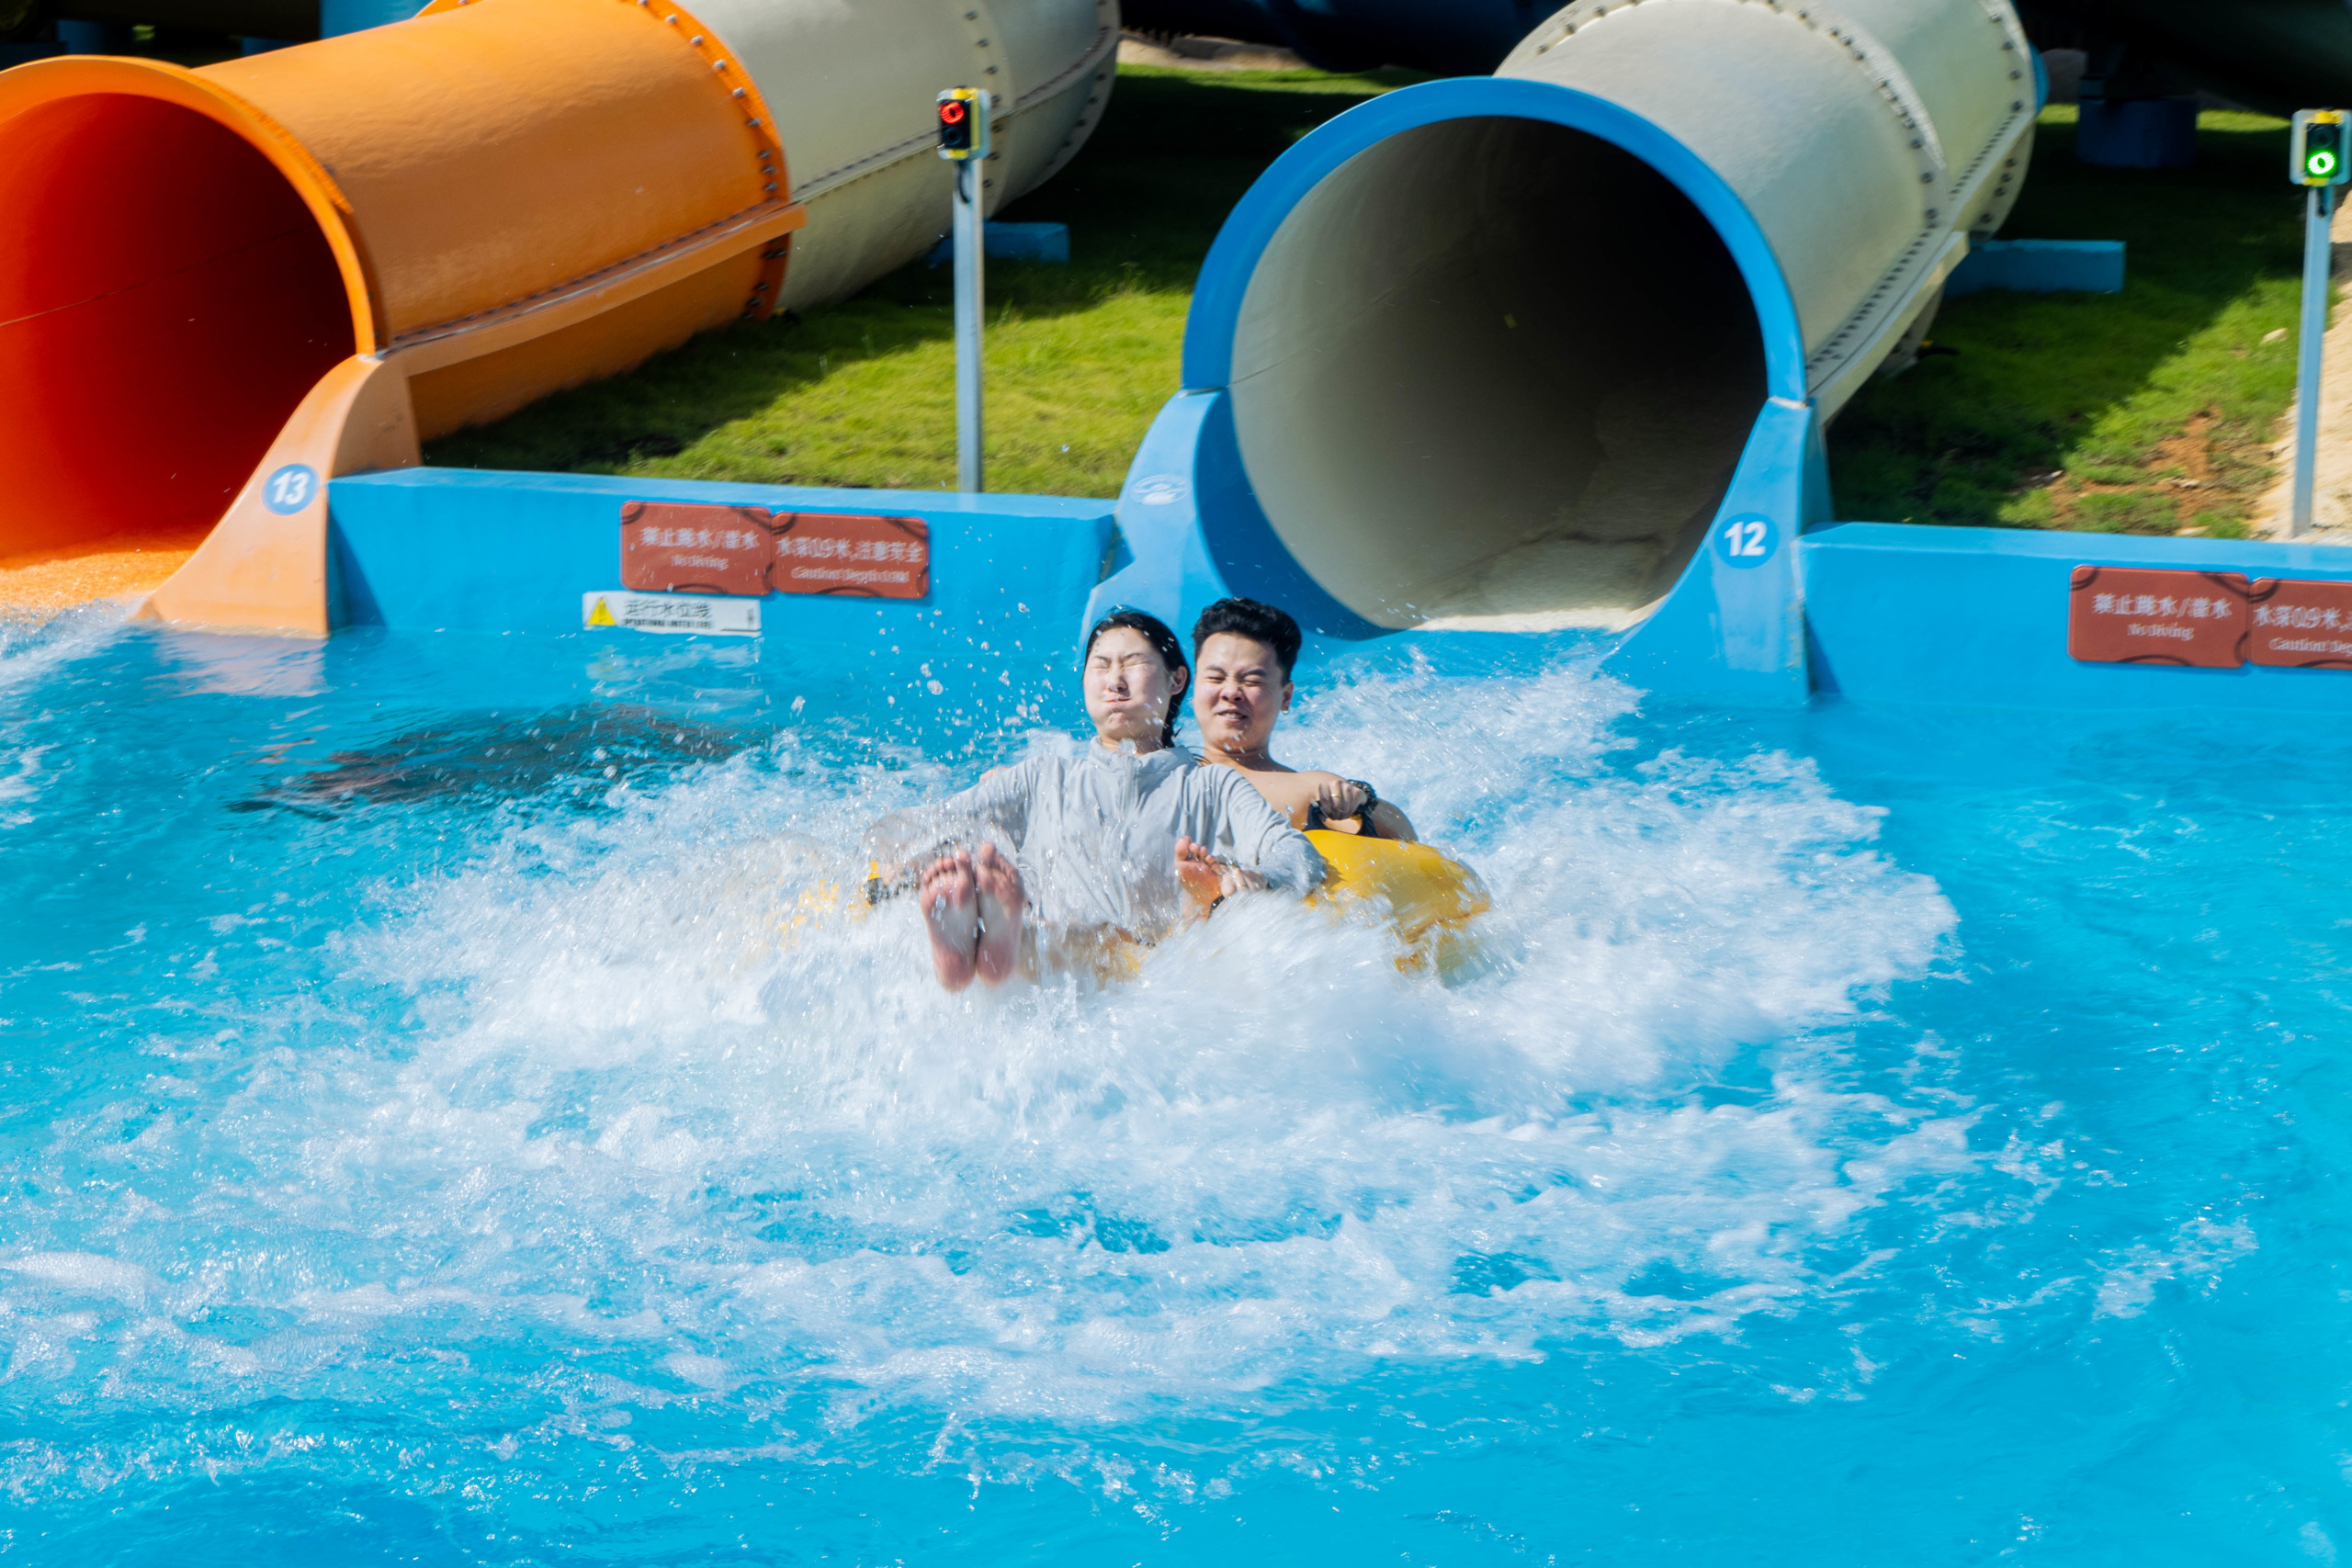 Two people in an inner tube coming out of a water slide flume